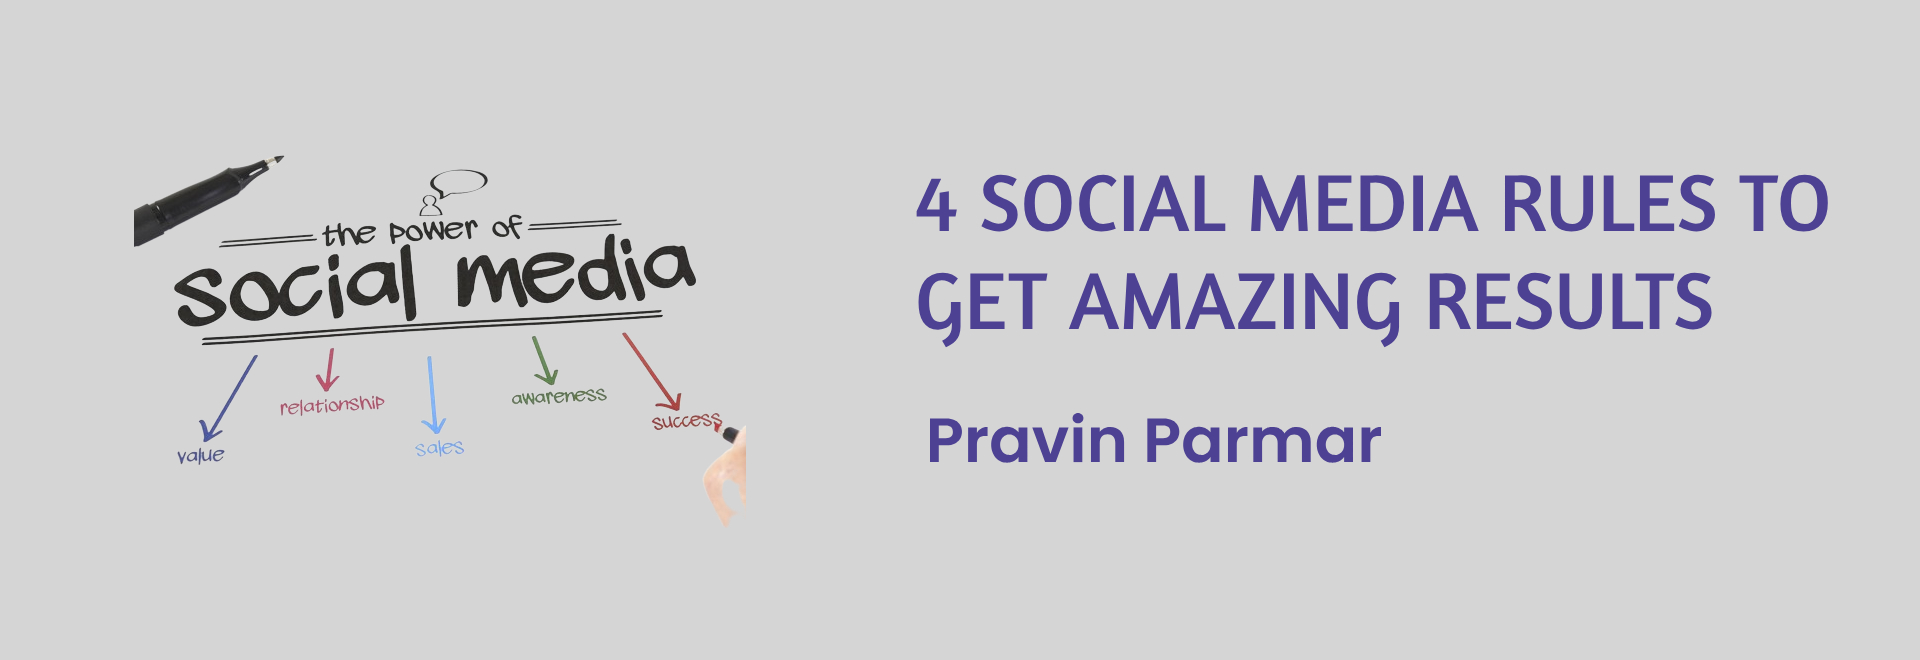 Top 4 SOCIAL MEDIA RULES TO GET AMAZING RESULTS